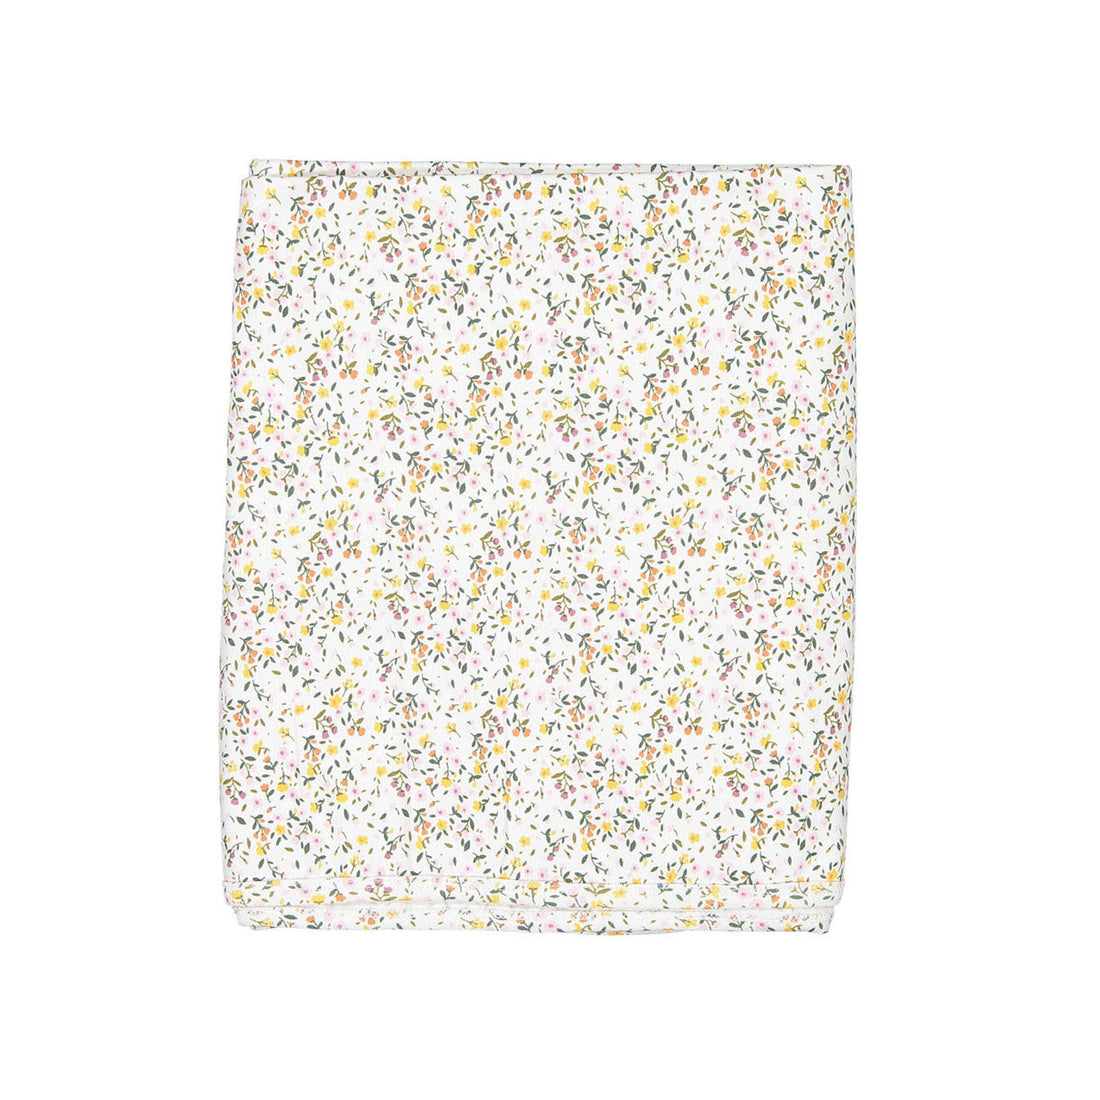 Smalls accessories OS Smalls Spring Flower Blanket